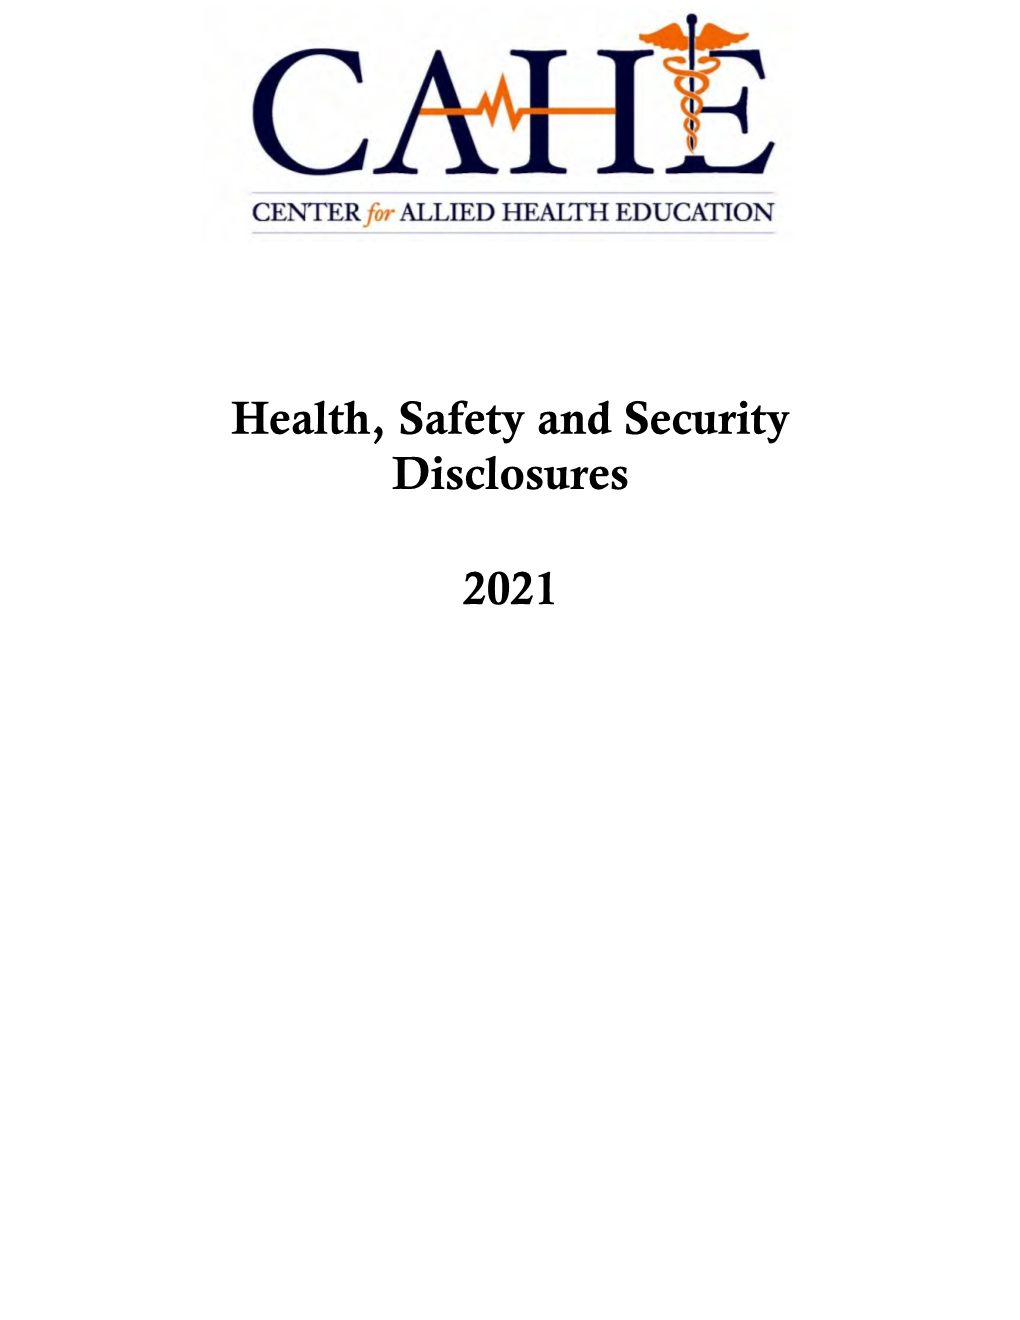 Health, Safety and Security Disclosures 2021